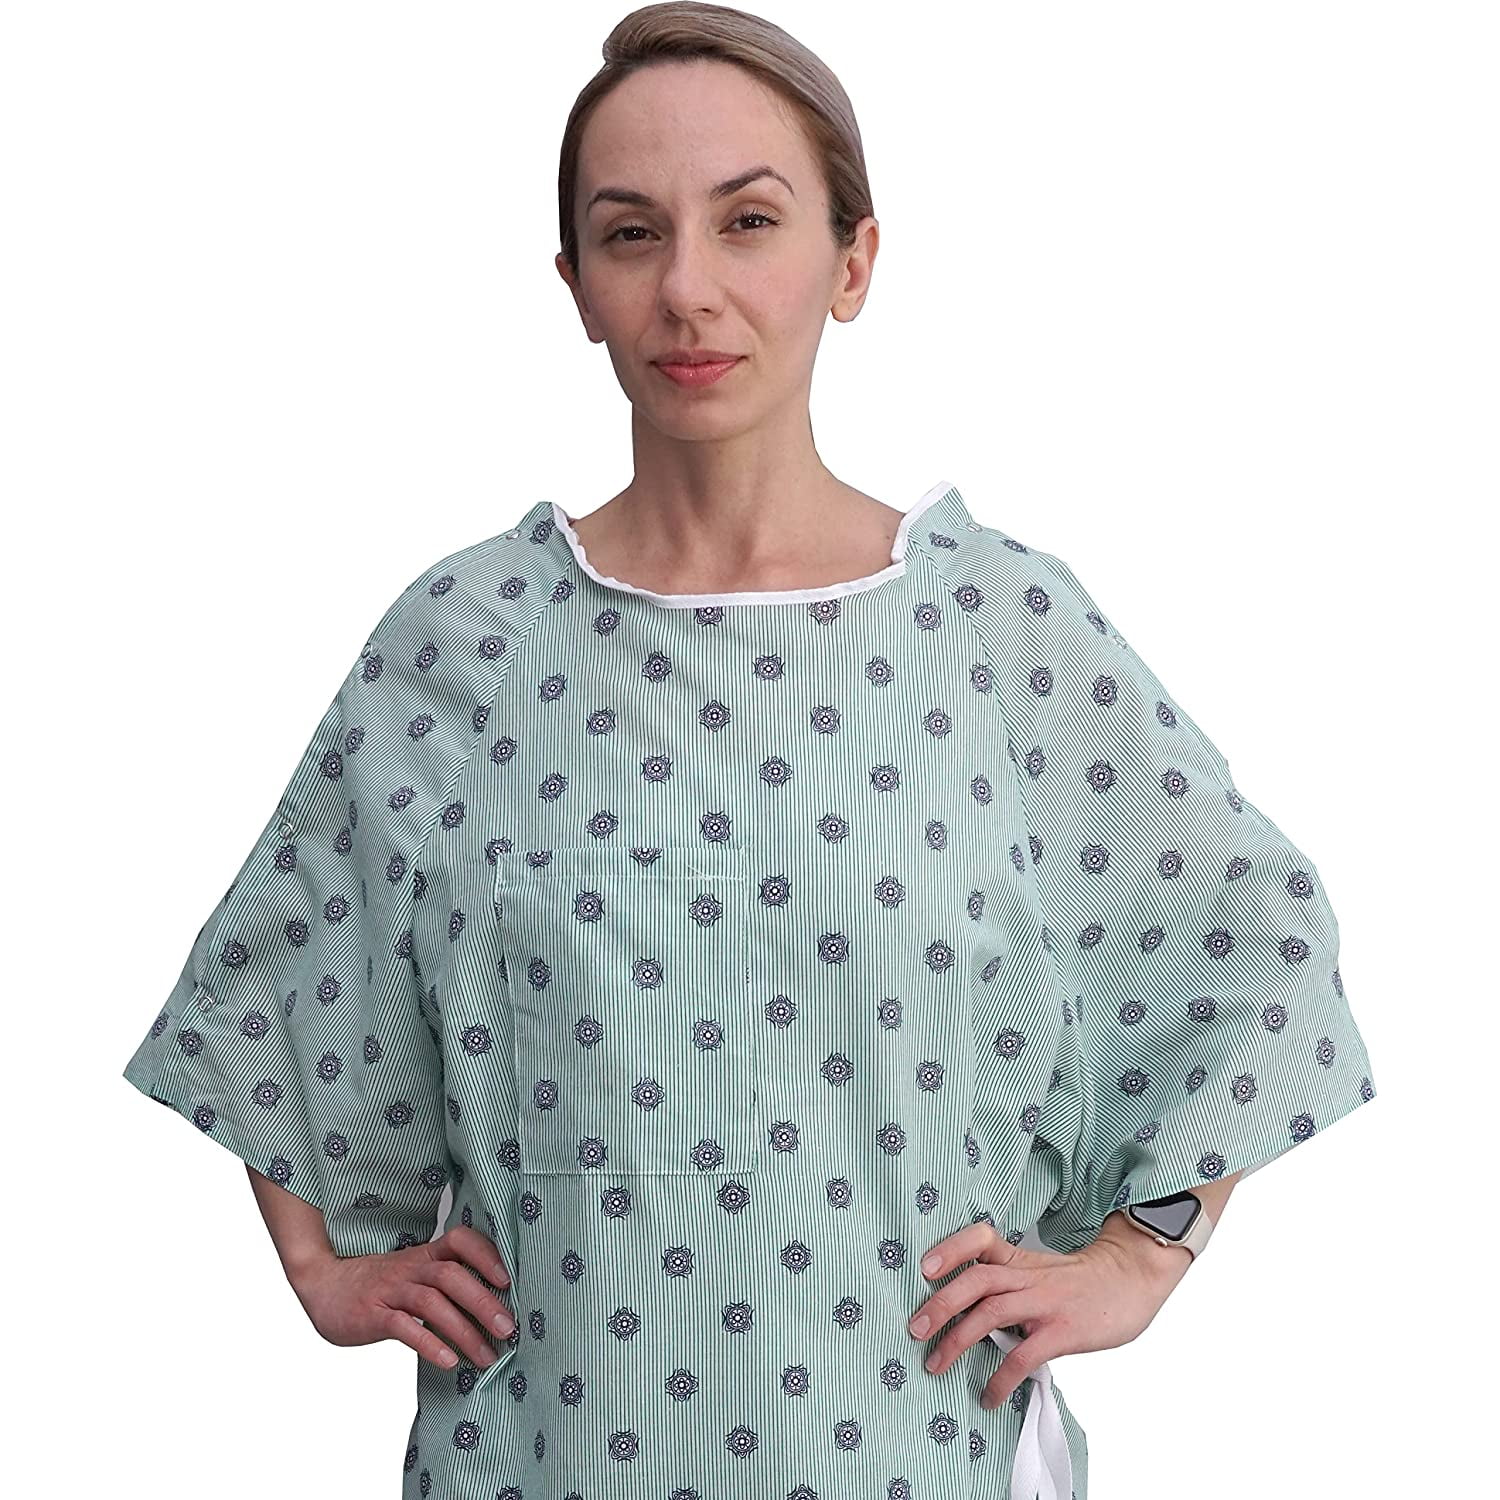 Patient Gown | The I.V. Gown™ | Salk, Inc.